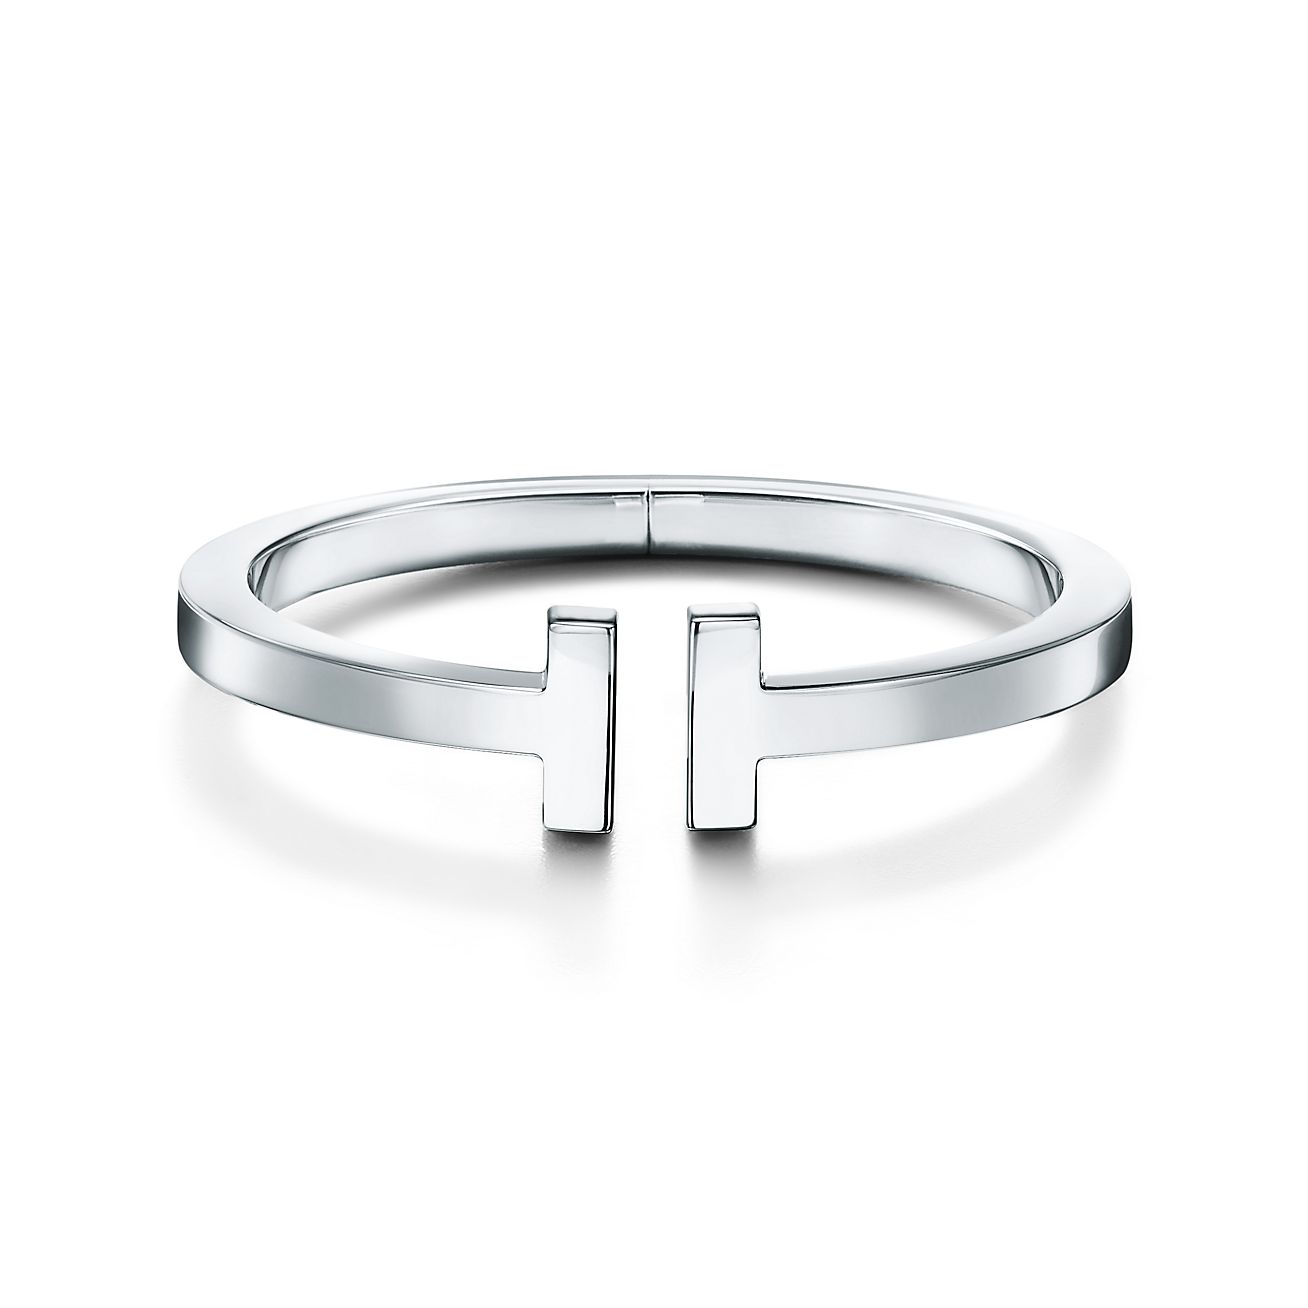 Tiffany T square bracelet in sterling silver, extra small. | Tiffany & Co.